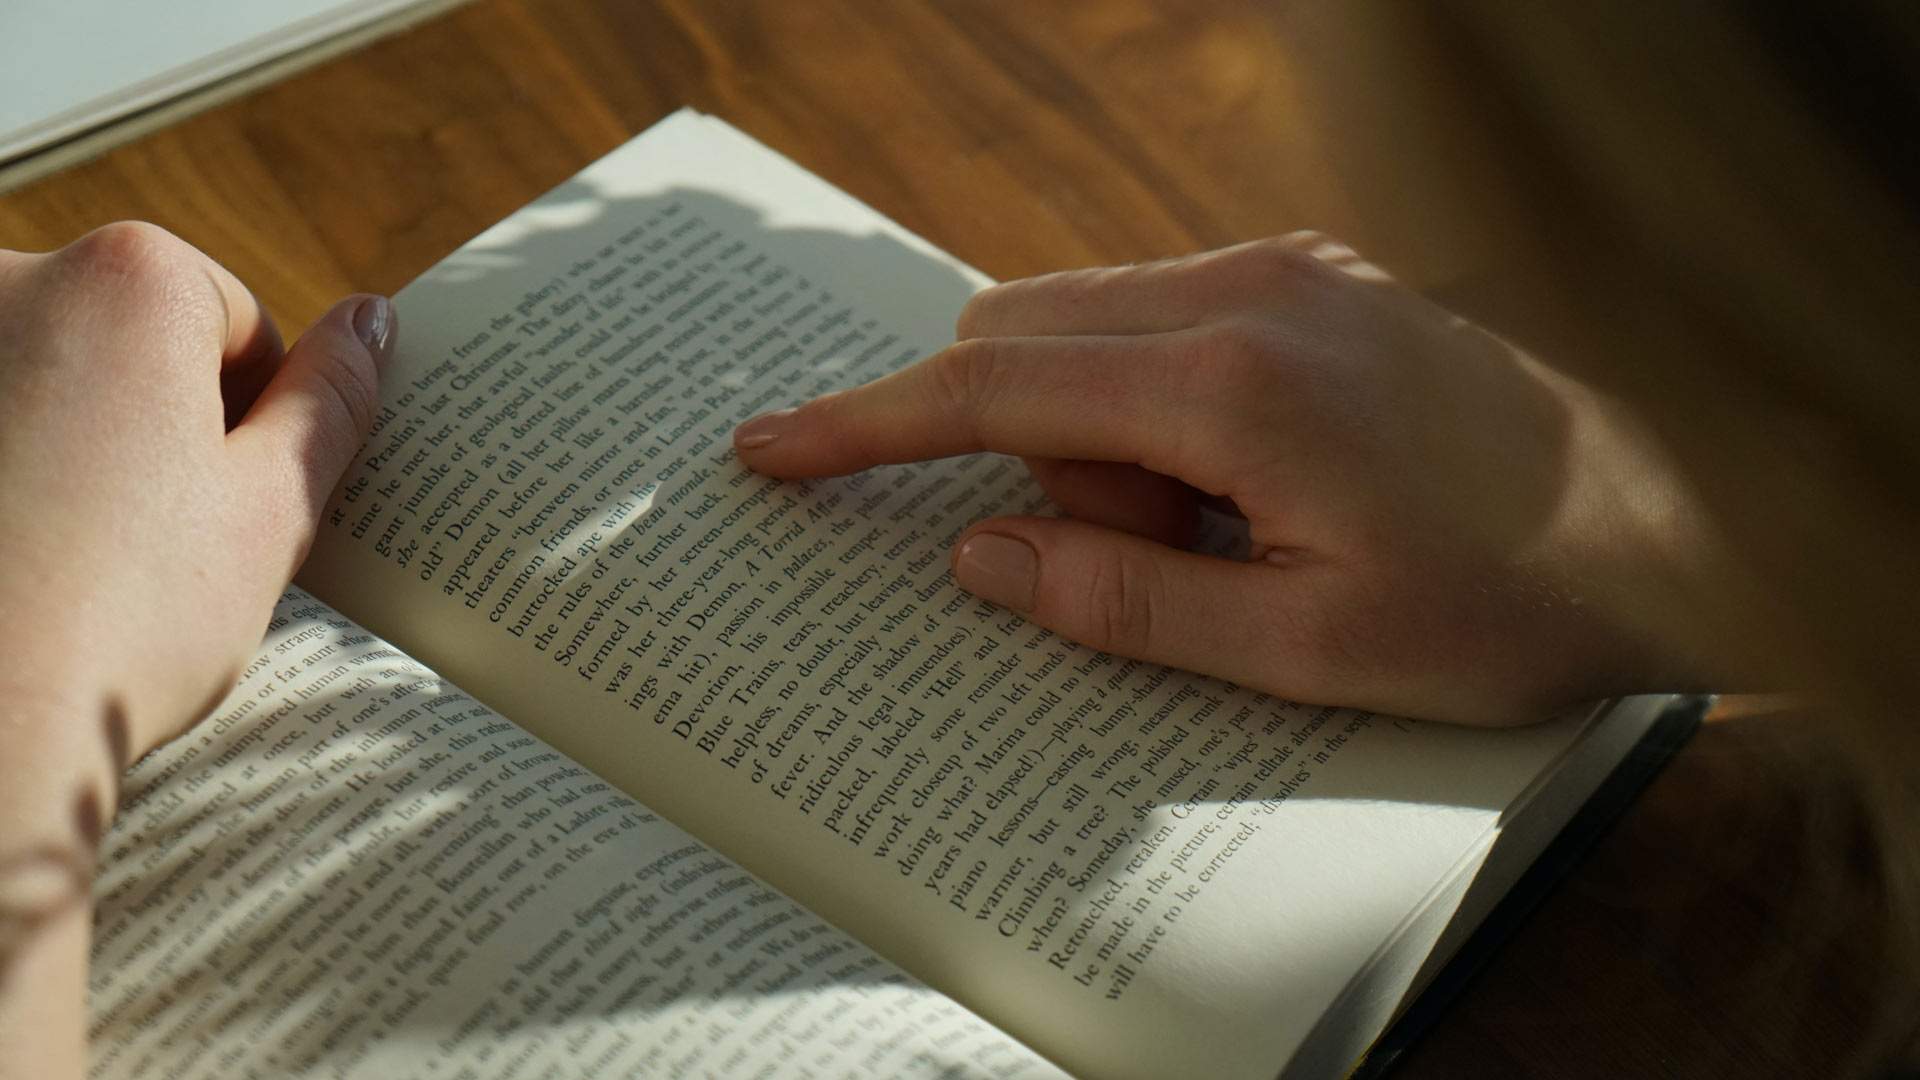 A photograph form behind of a person reading an unspecified book